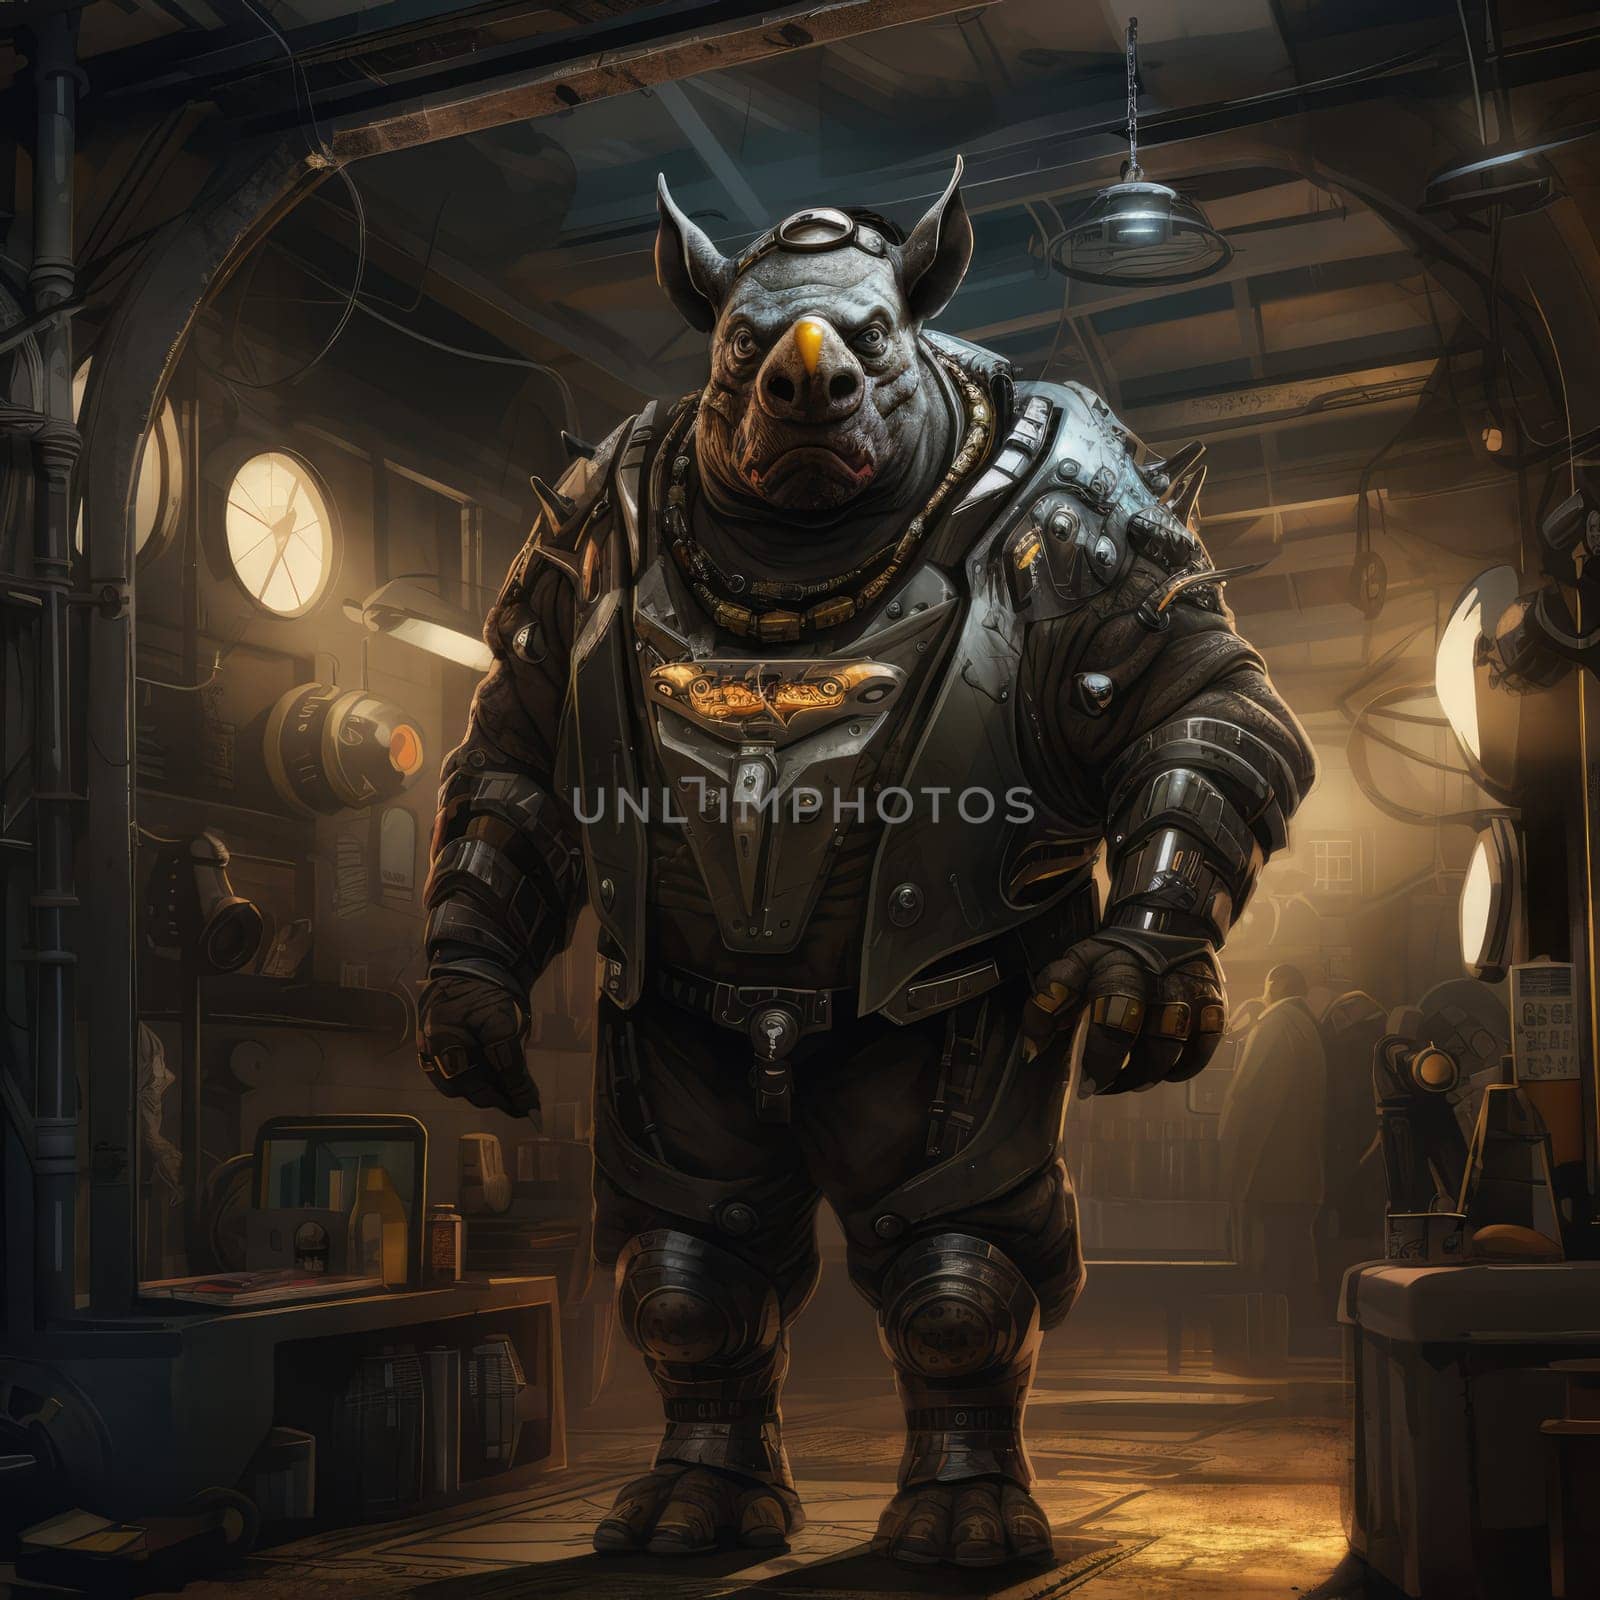 Steampunk rhino standing inside a room with industrial equipment by palinchak